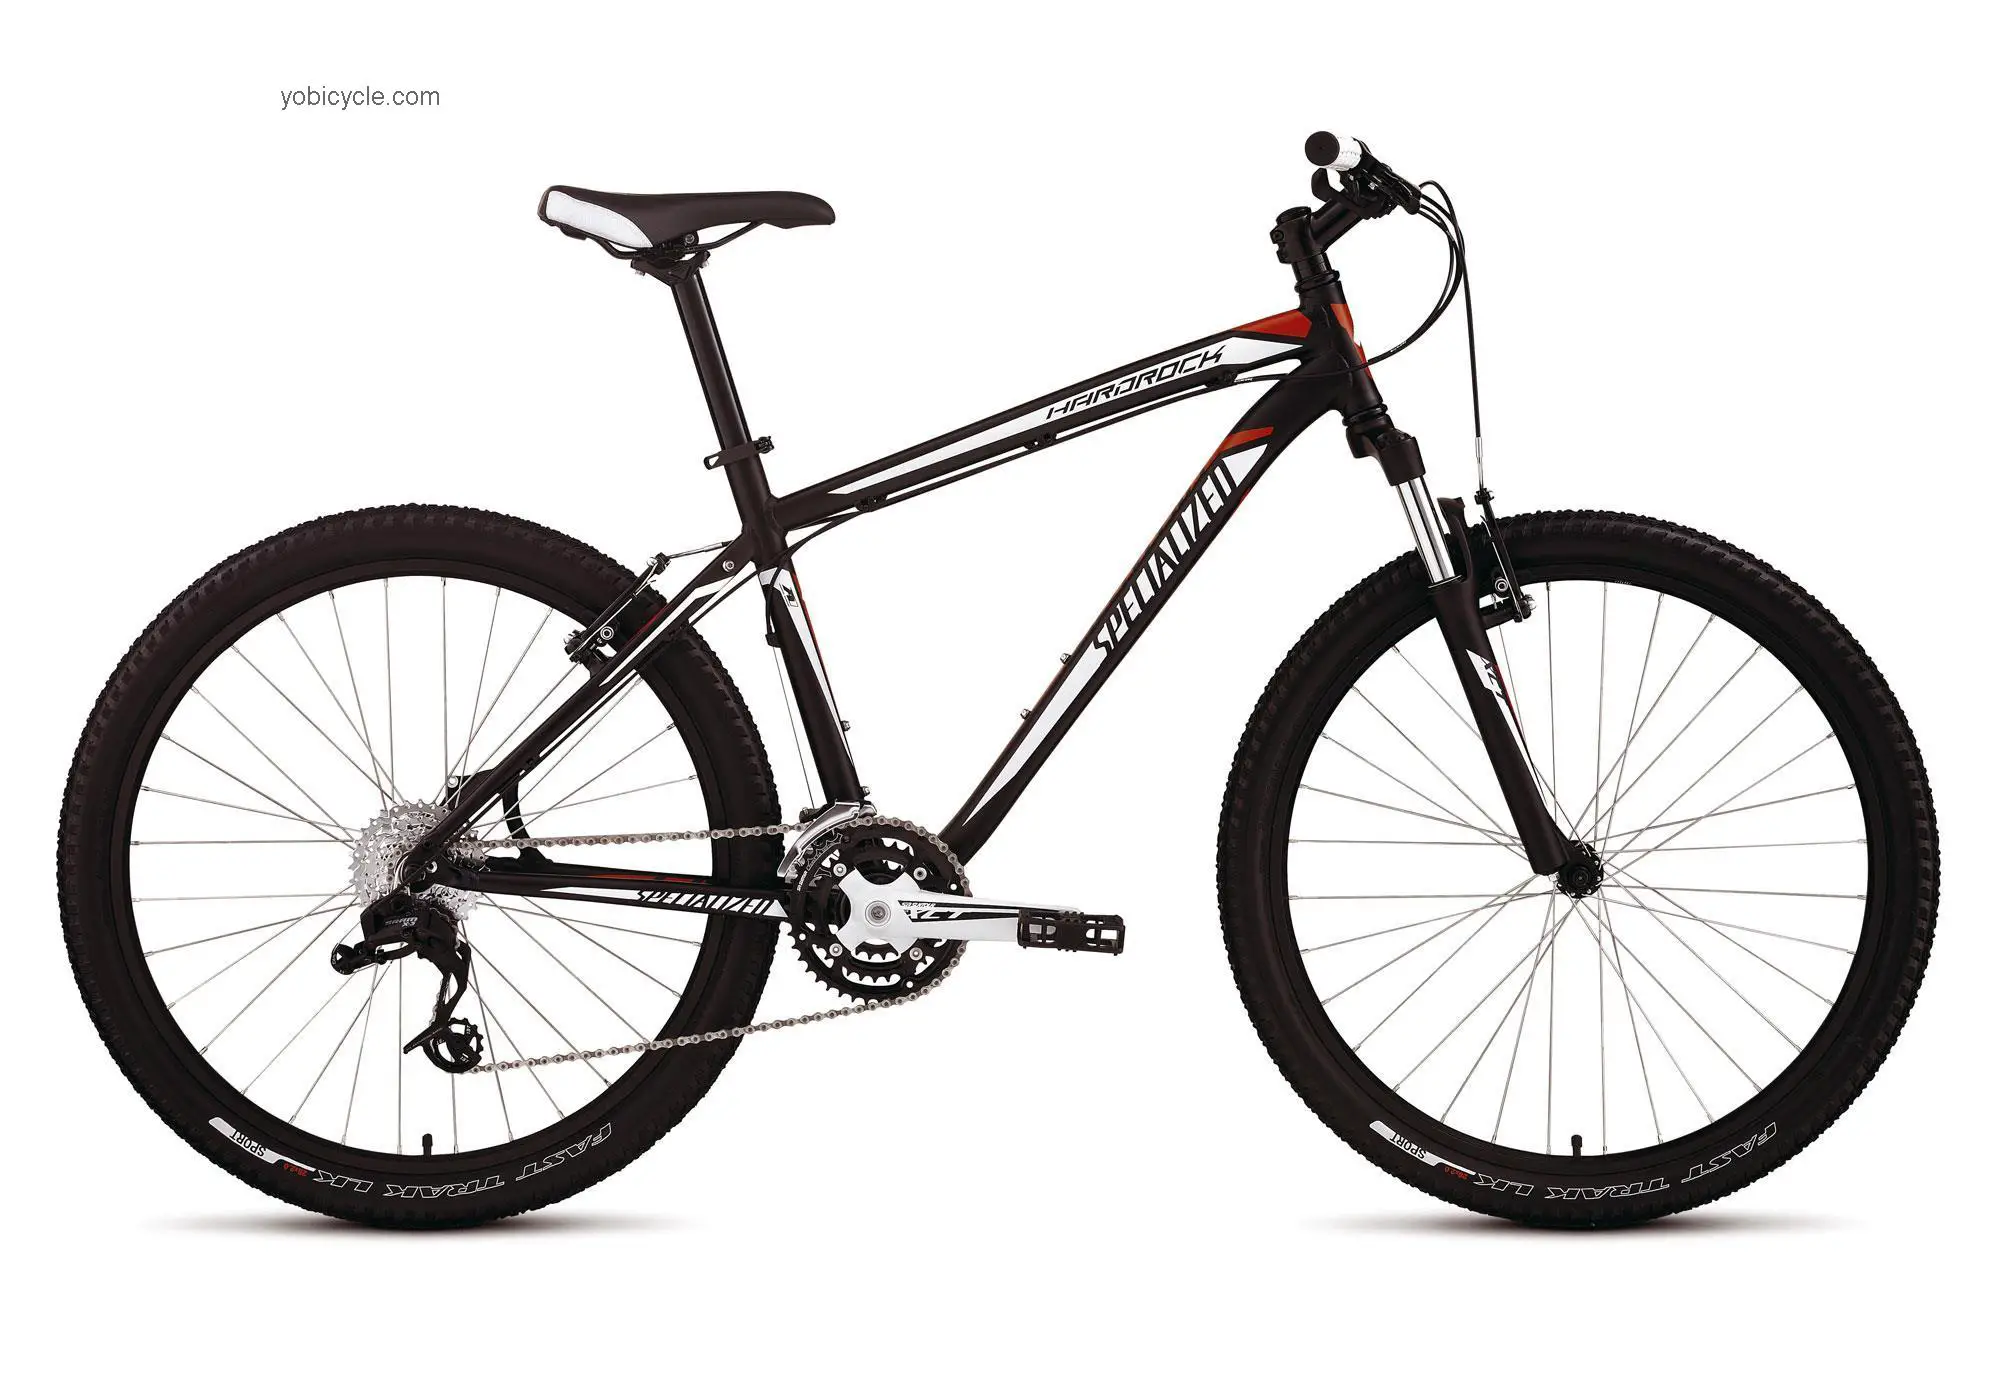 Specialized Hardrock 2012 comparison online with competitors